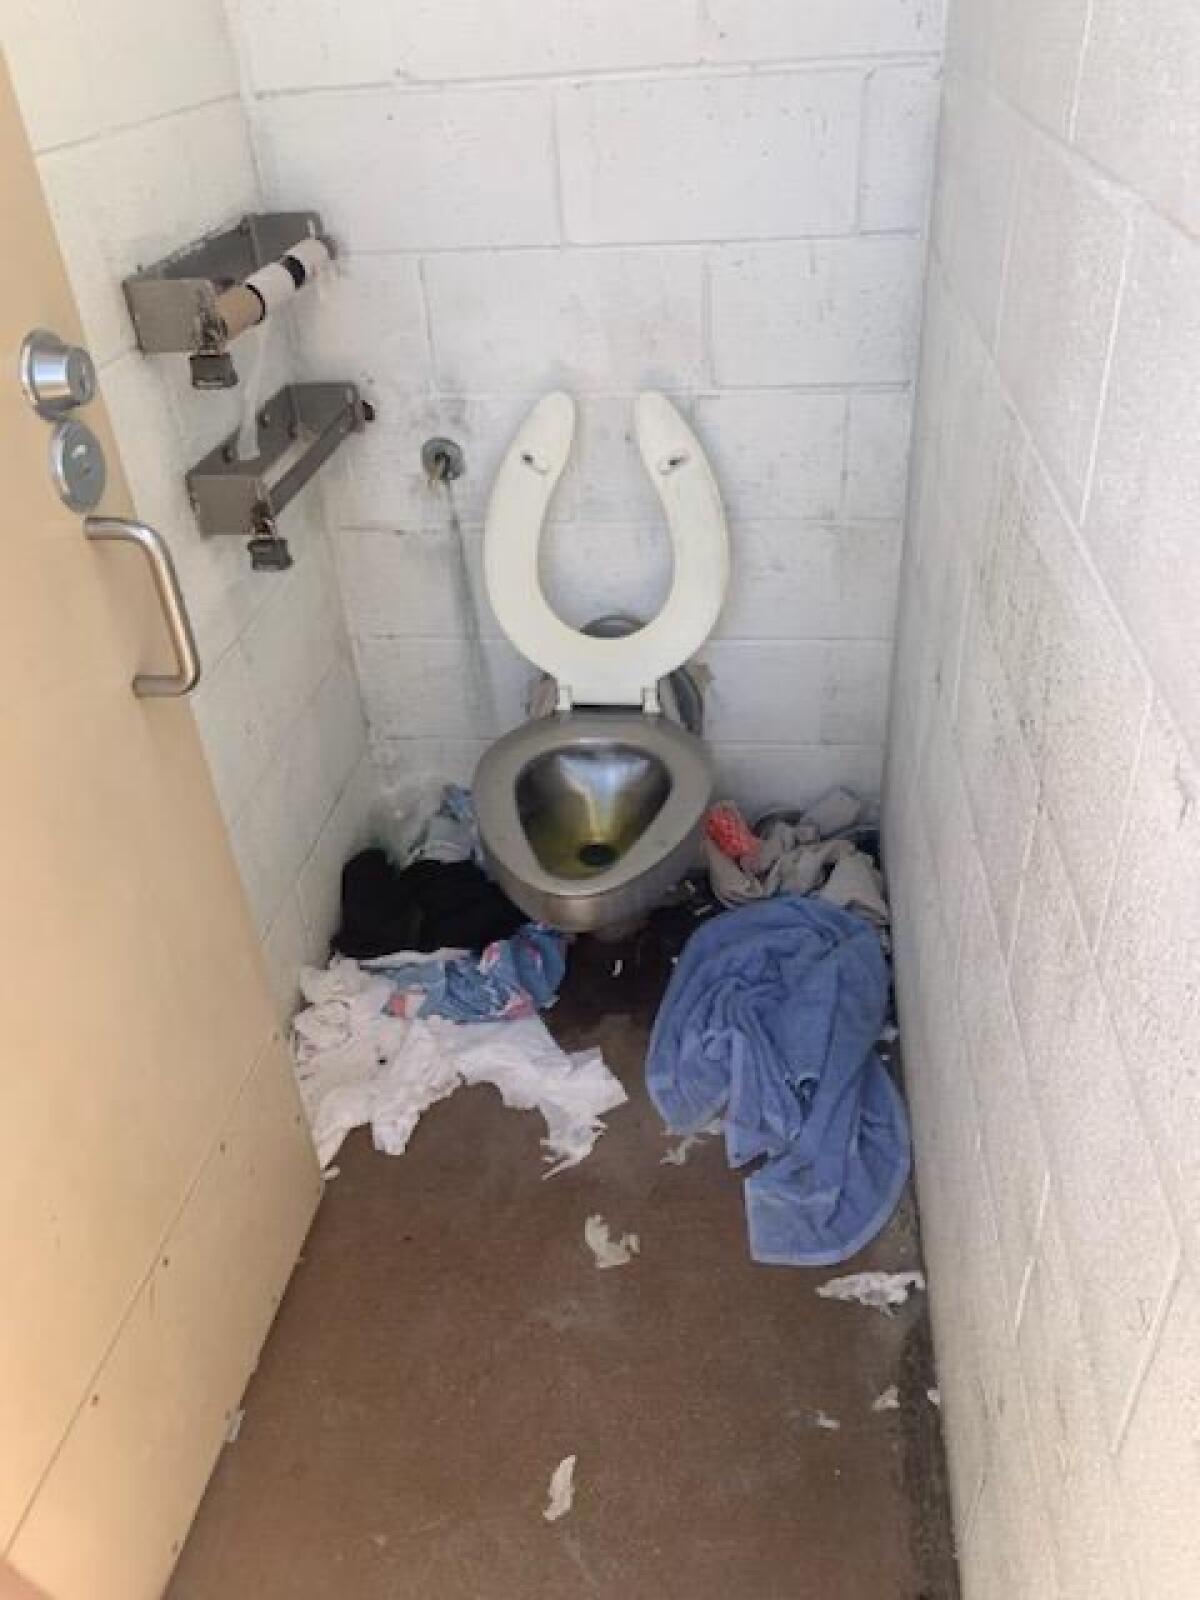 Resident Mike McCormack called this condition "nuts" at the south restroom facility at La Jolla Shores' Kellogg Park.